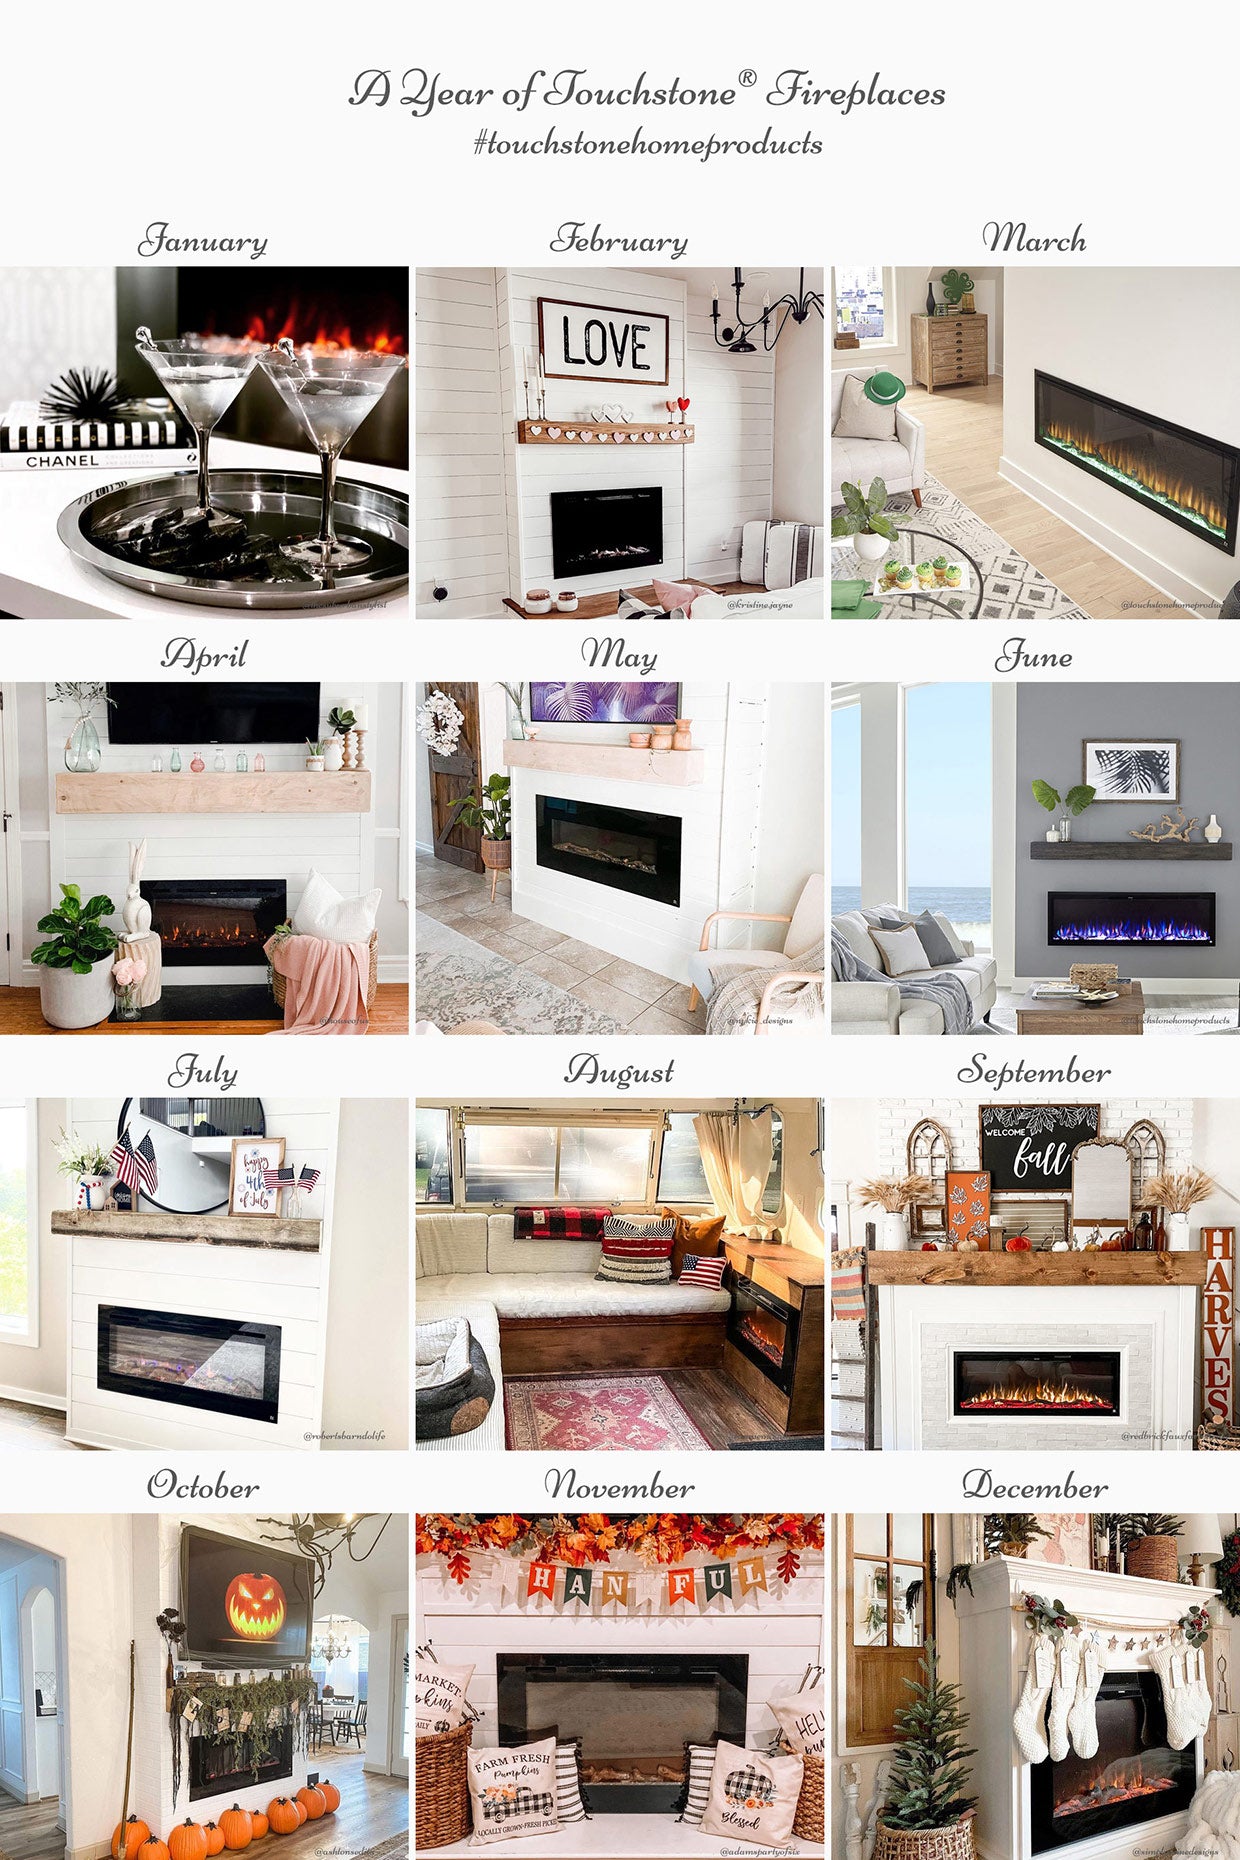 Touchstone electric fireplaces decorated for every month of the year